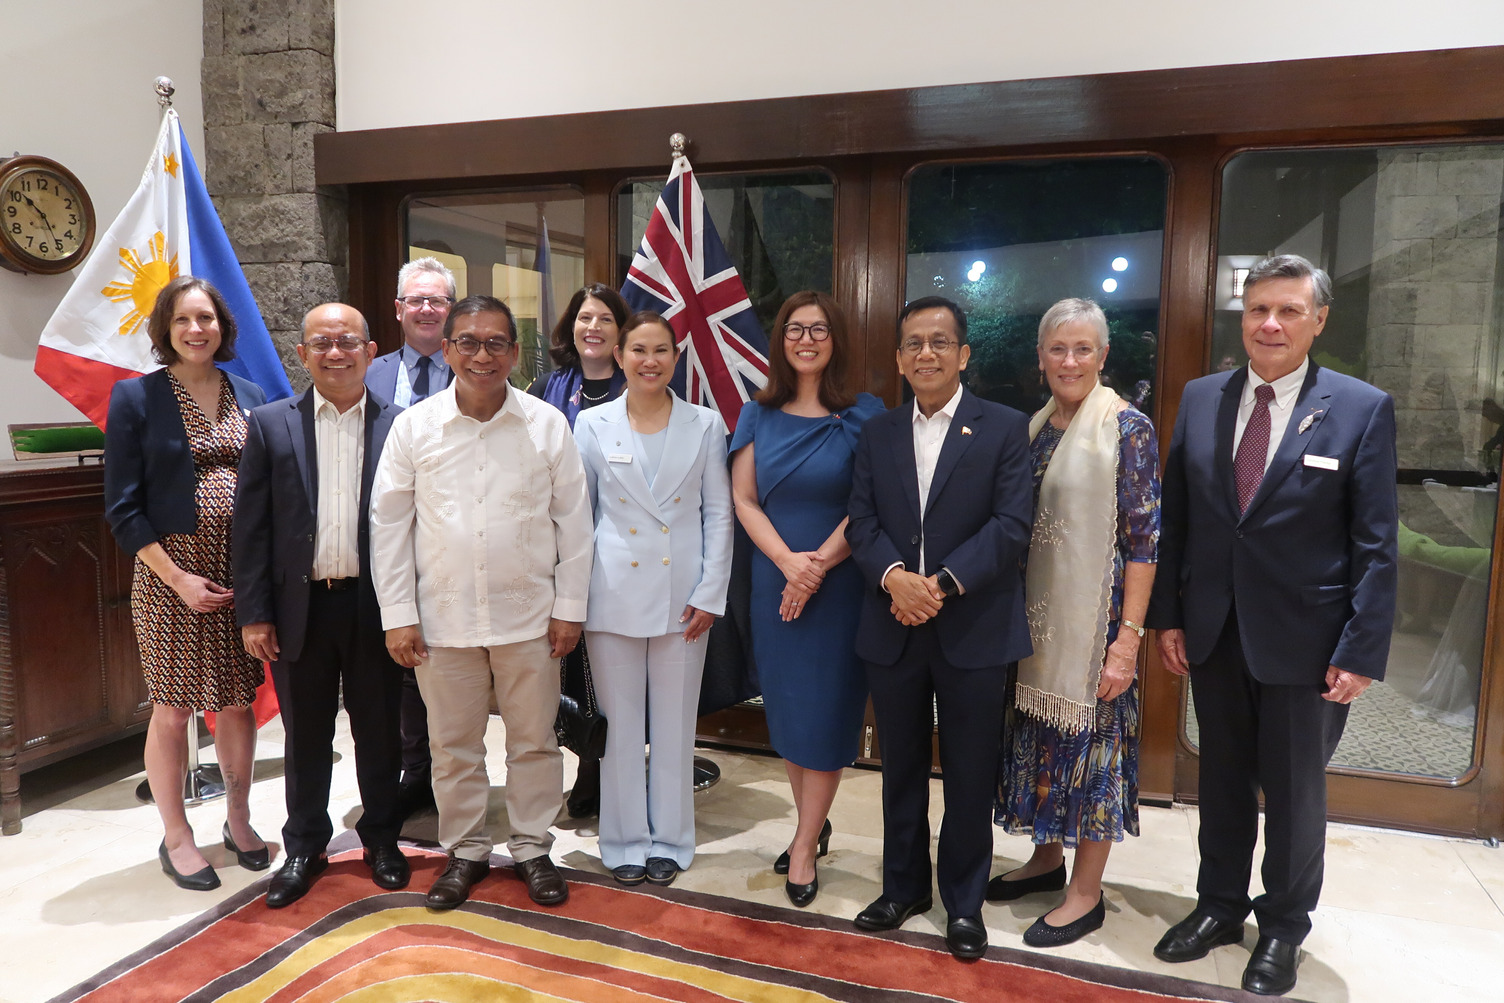 The Commissioners at a welcome reception hosted by the Australian Ambassador to the Philippines HE HK Yu (4th from right). The Commissioners met key partners including the Department of Science and Technology Secretary Dr Renato Solidum Jr (front, 3rd from left), National Economic and Development Authority Secretary Dr Arsenio Balisacan (3rd from right), and DOST-PCAARRD Executive Director Dr Reynalo Ebora (2nd from left). 